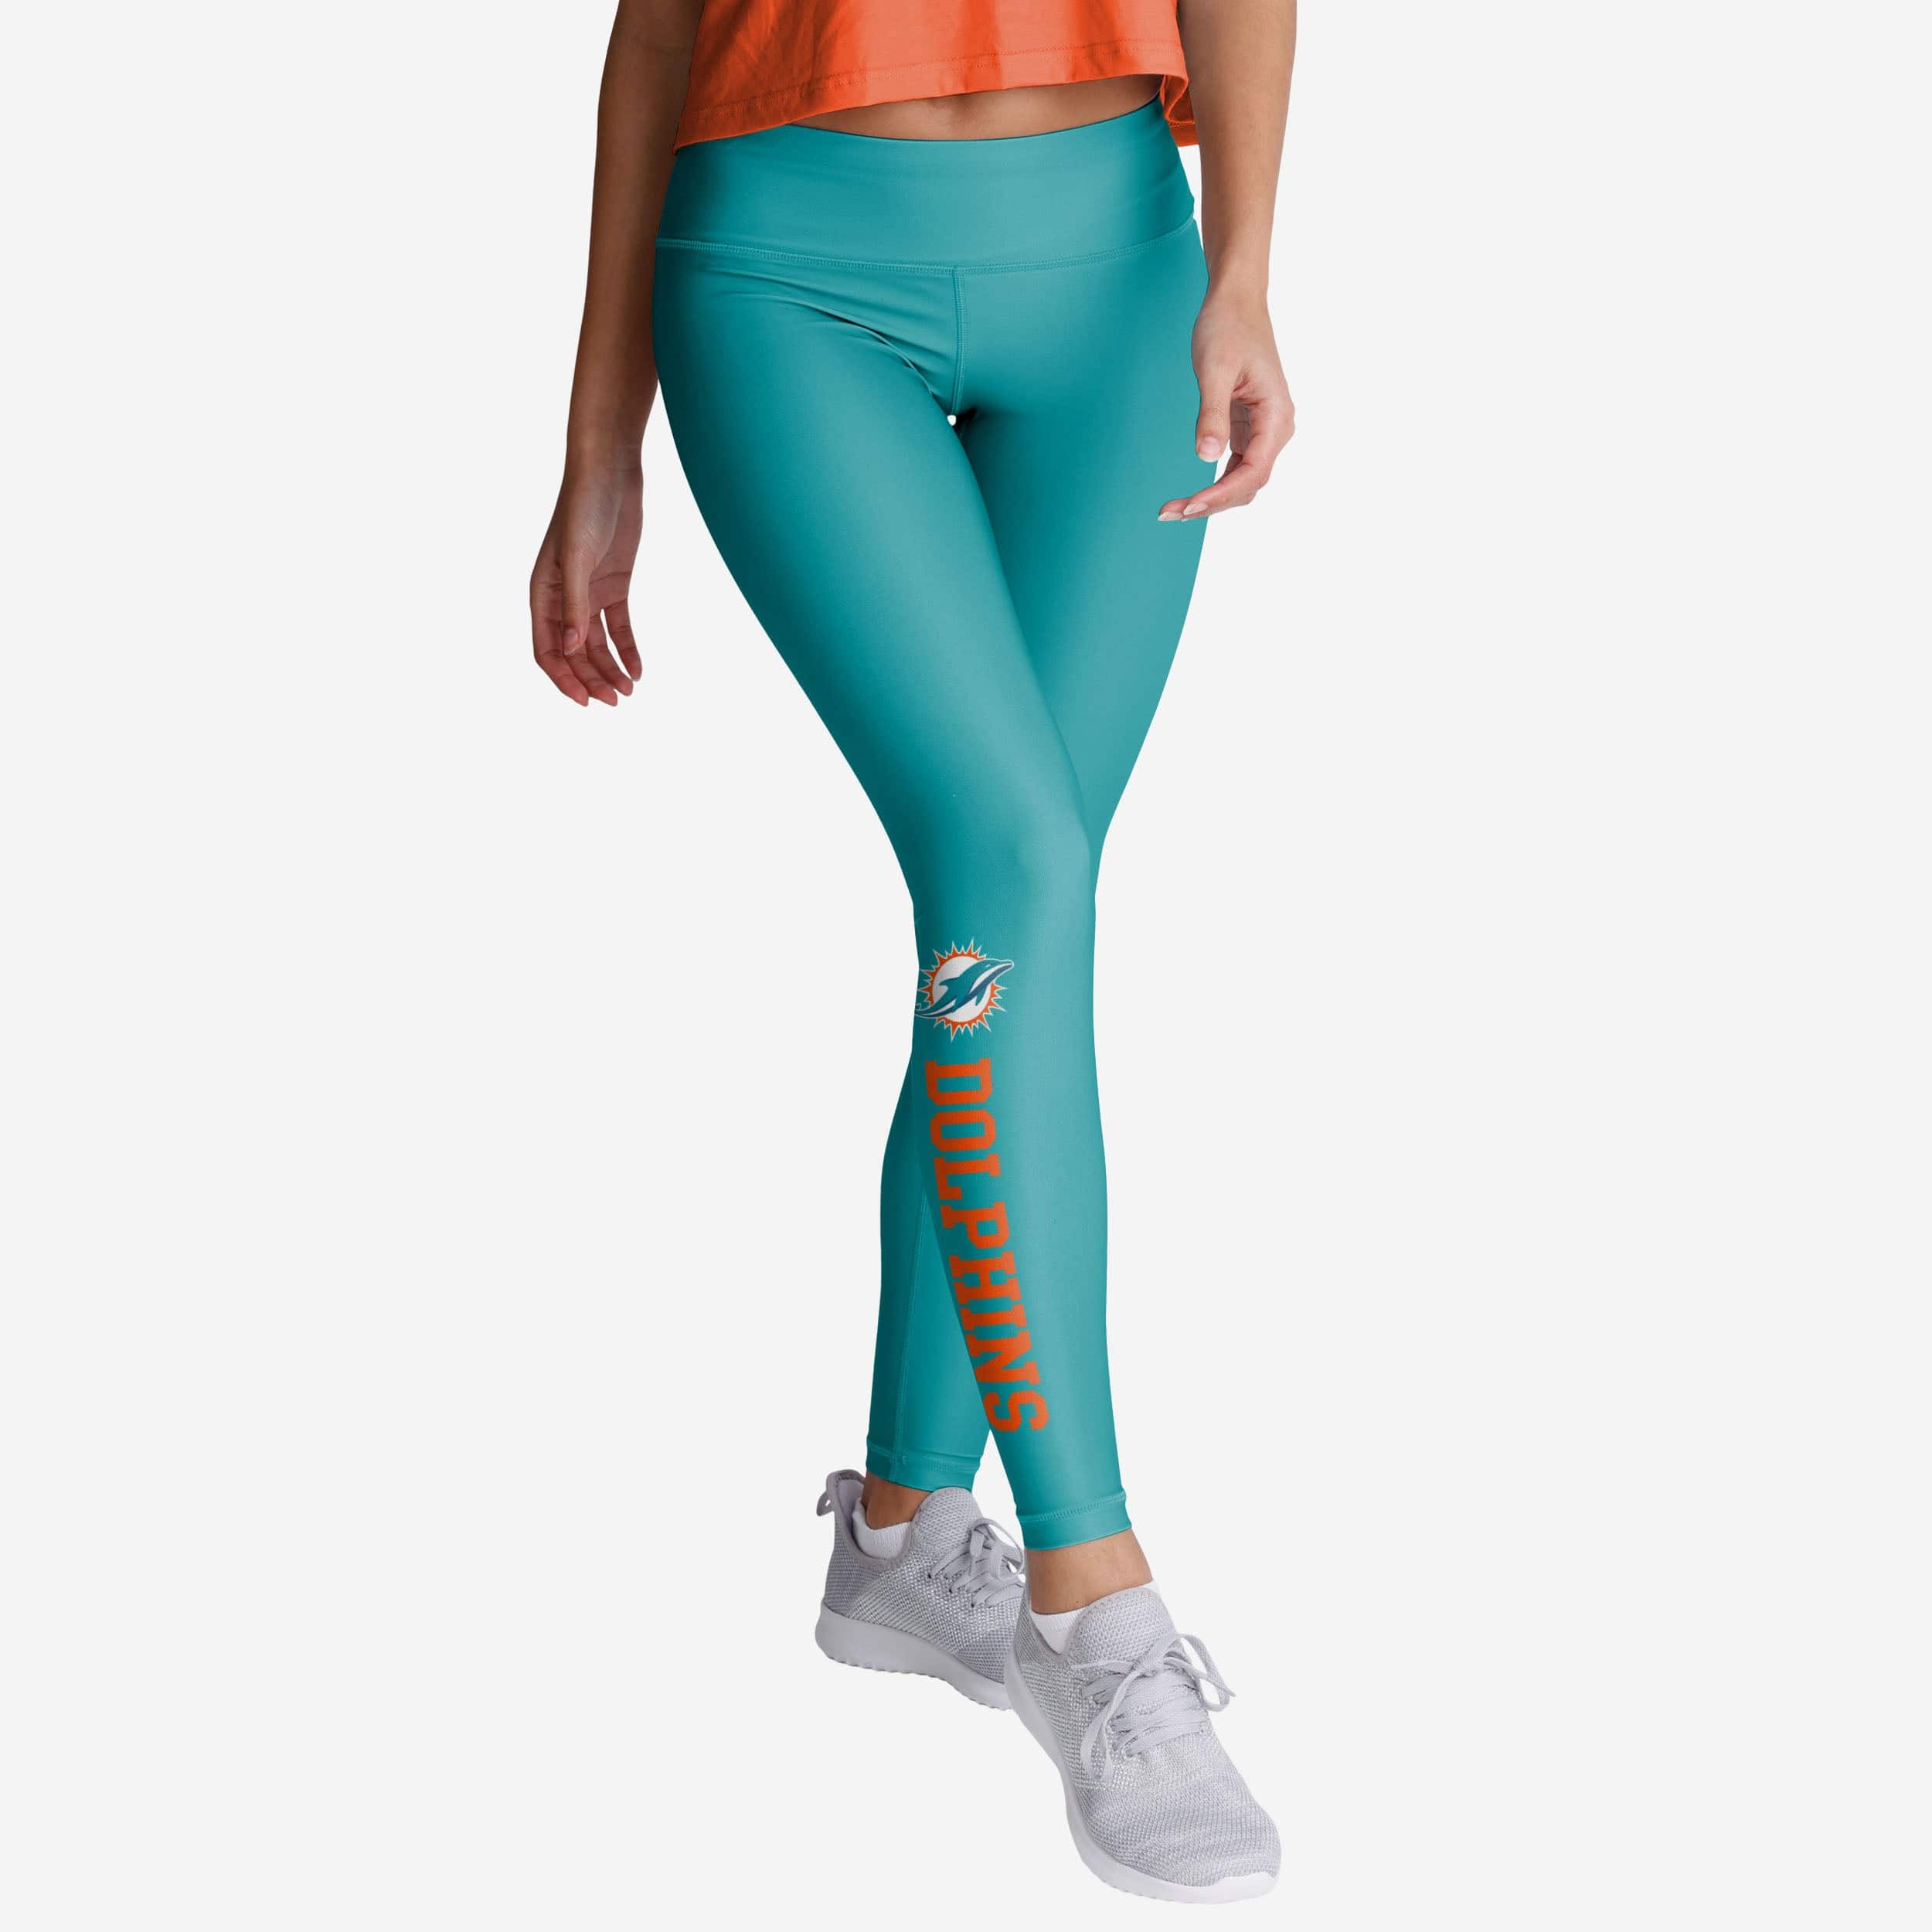 Go Colors Women Turquoise Blue Solid Ankle Length Leggings Price in India,  Full Specifications & Offers | DTashion.com